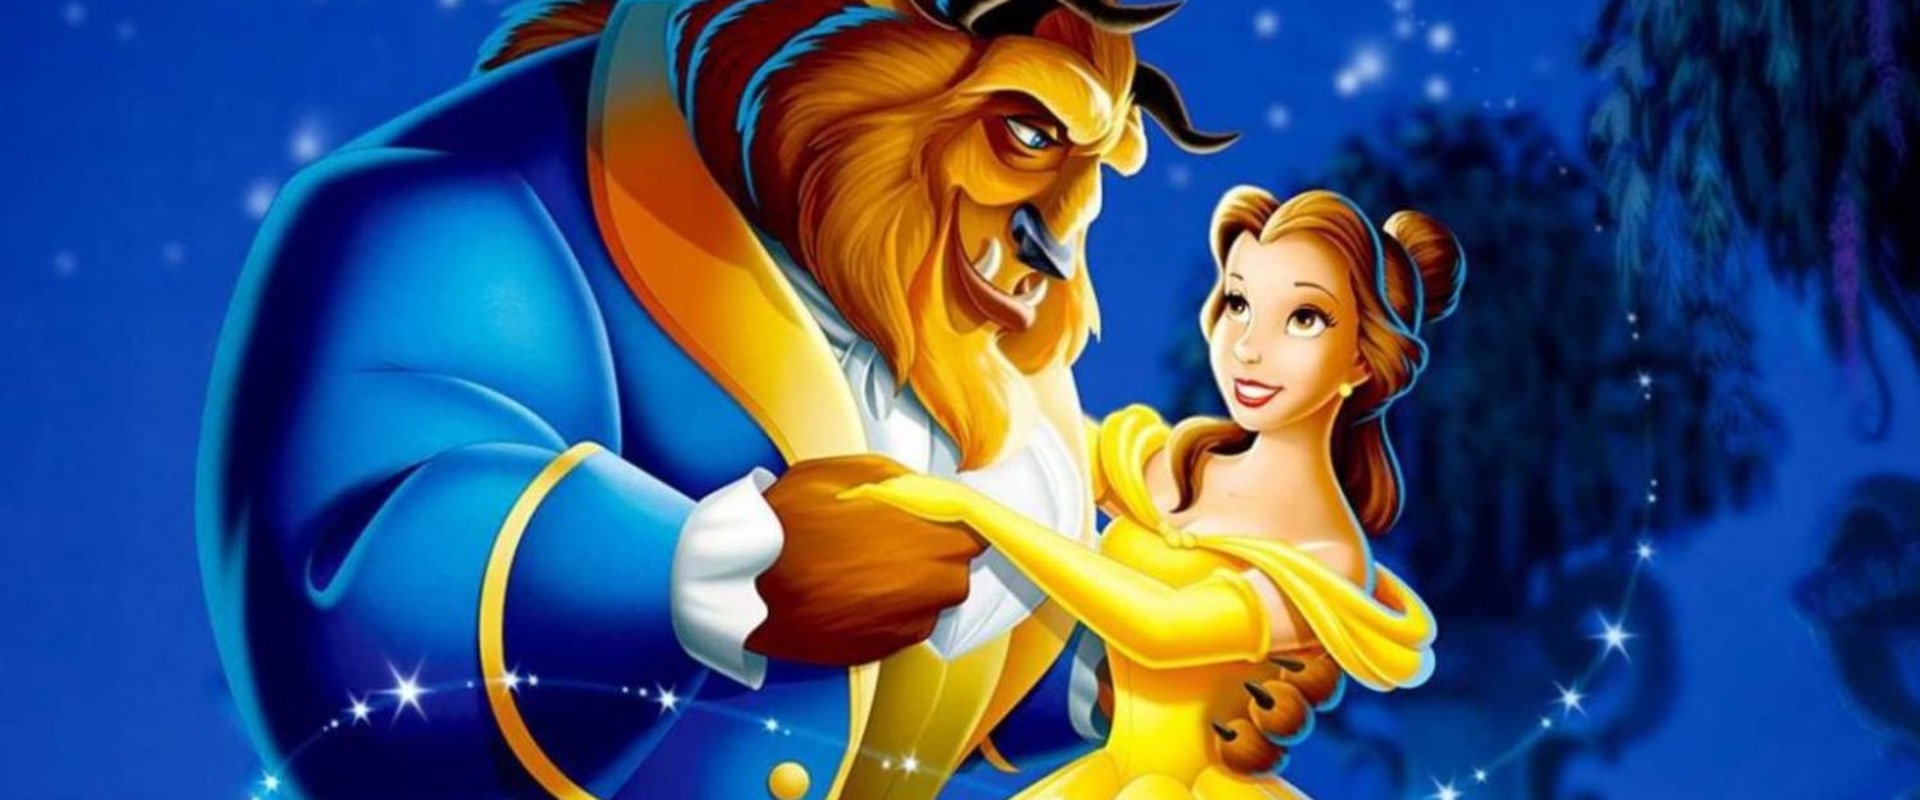 The Top 5 Most Popular Animated Movies of All Time